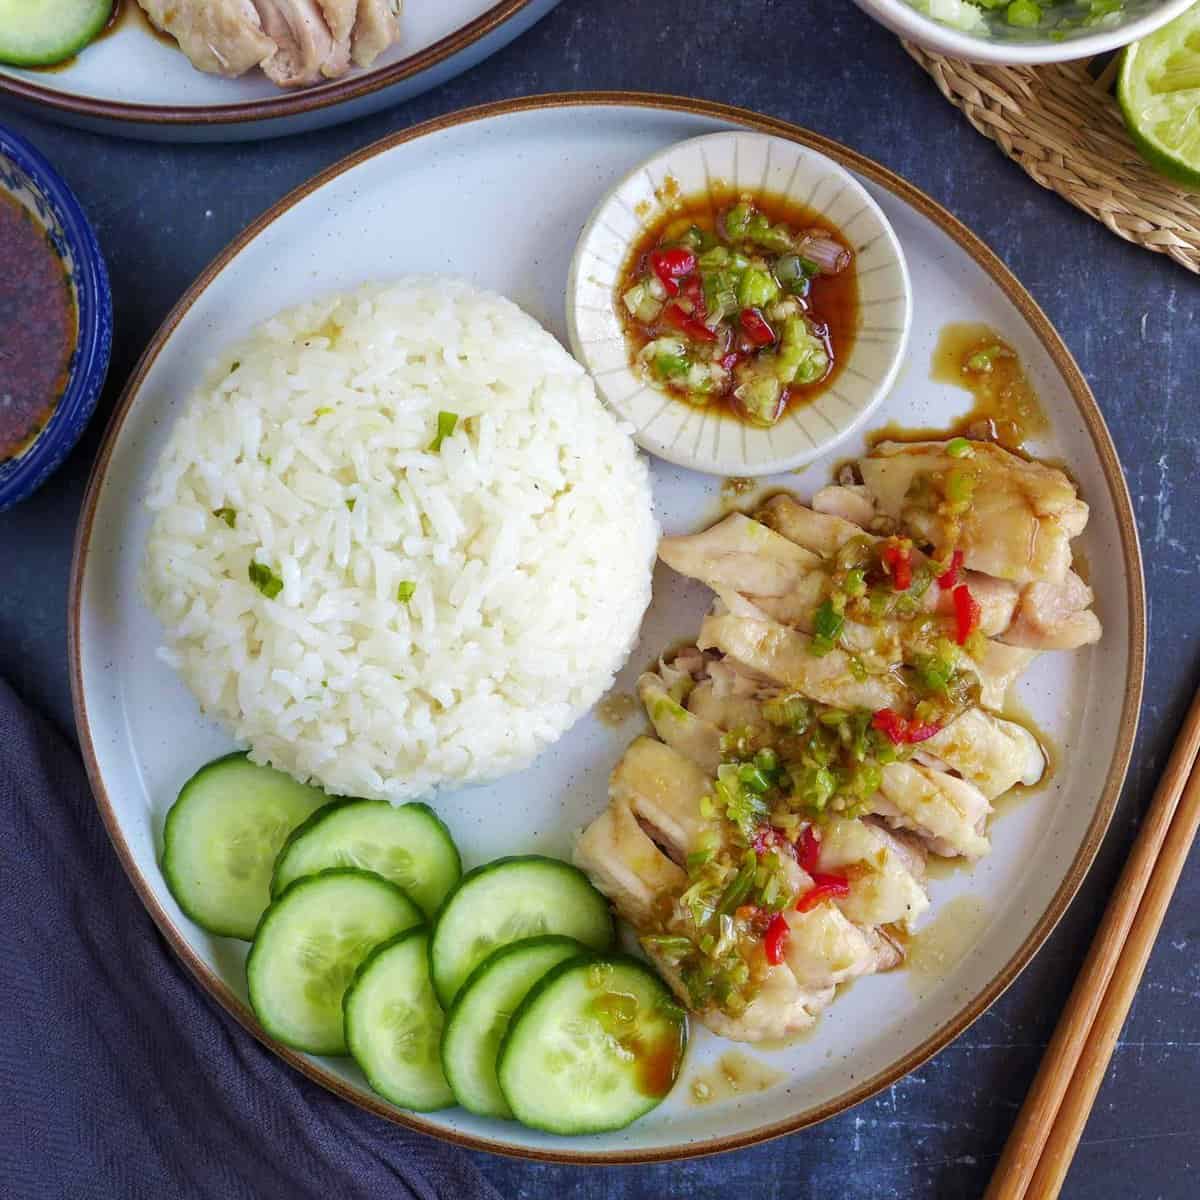 https://redhousespice.com/wp-content/uploads/2017/09/easy-hainanese-chicken-rice-scaled.jpg